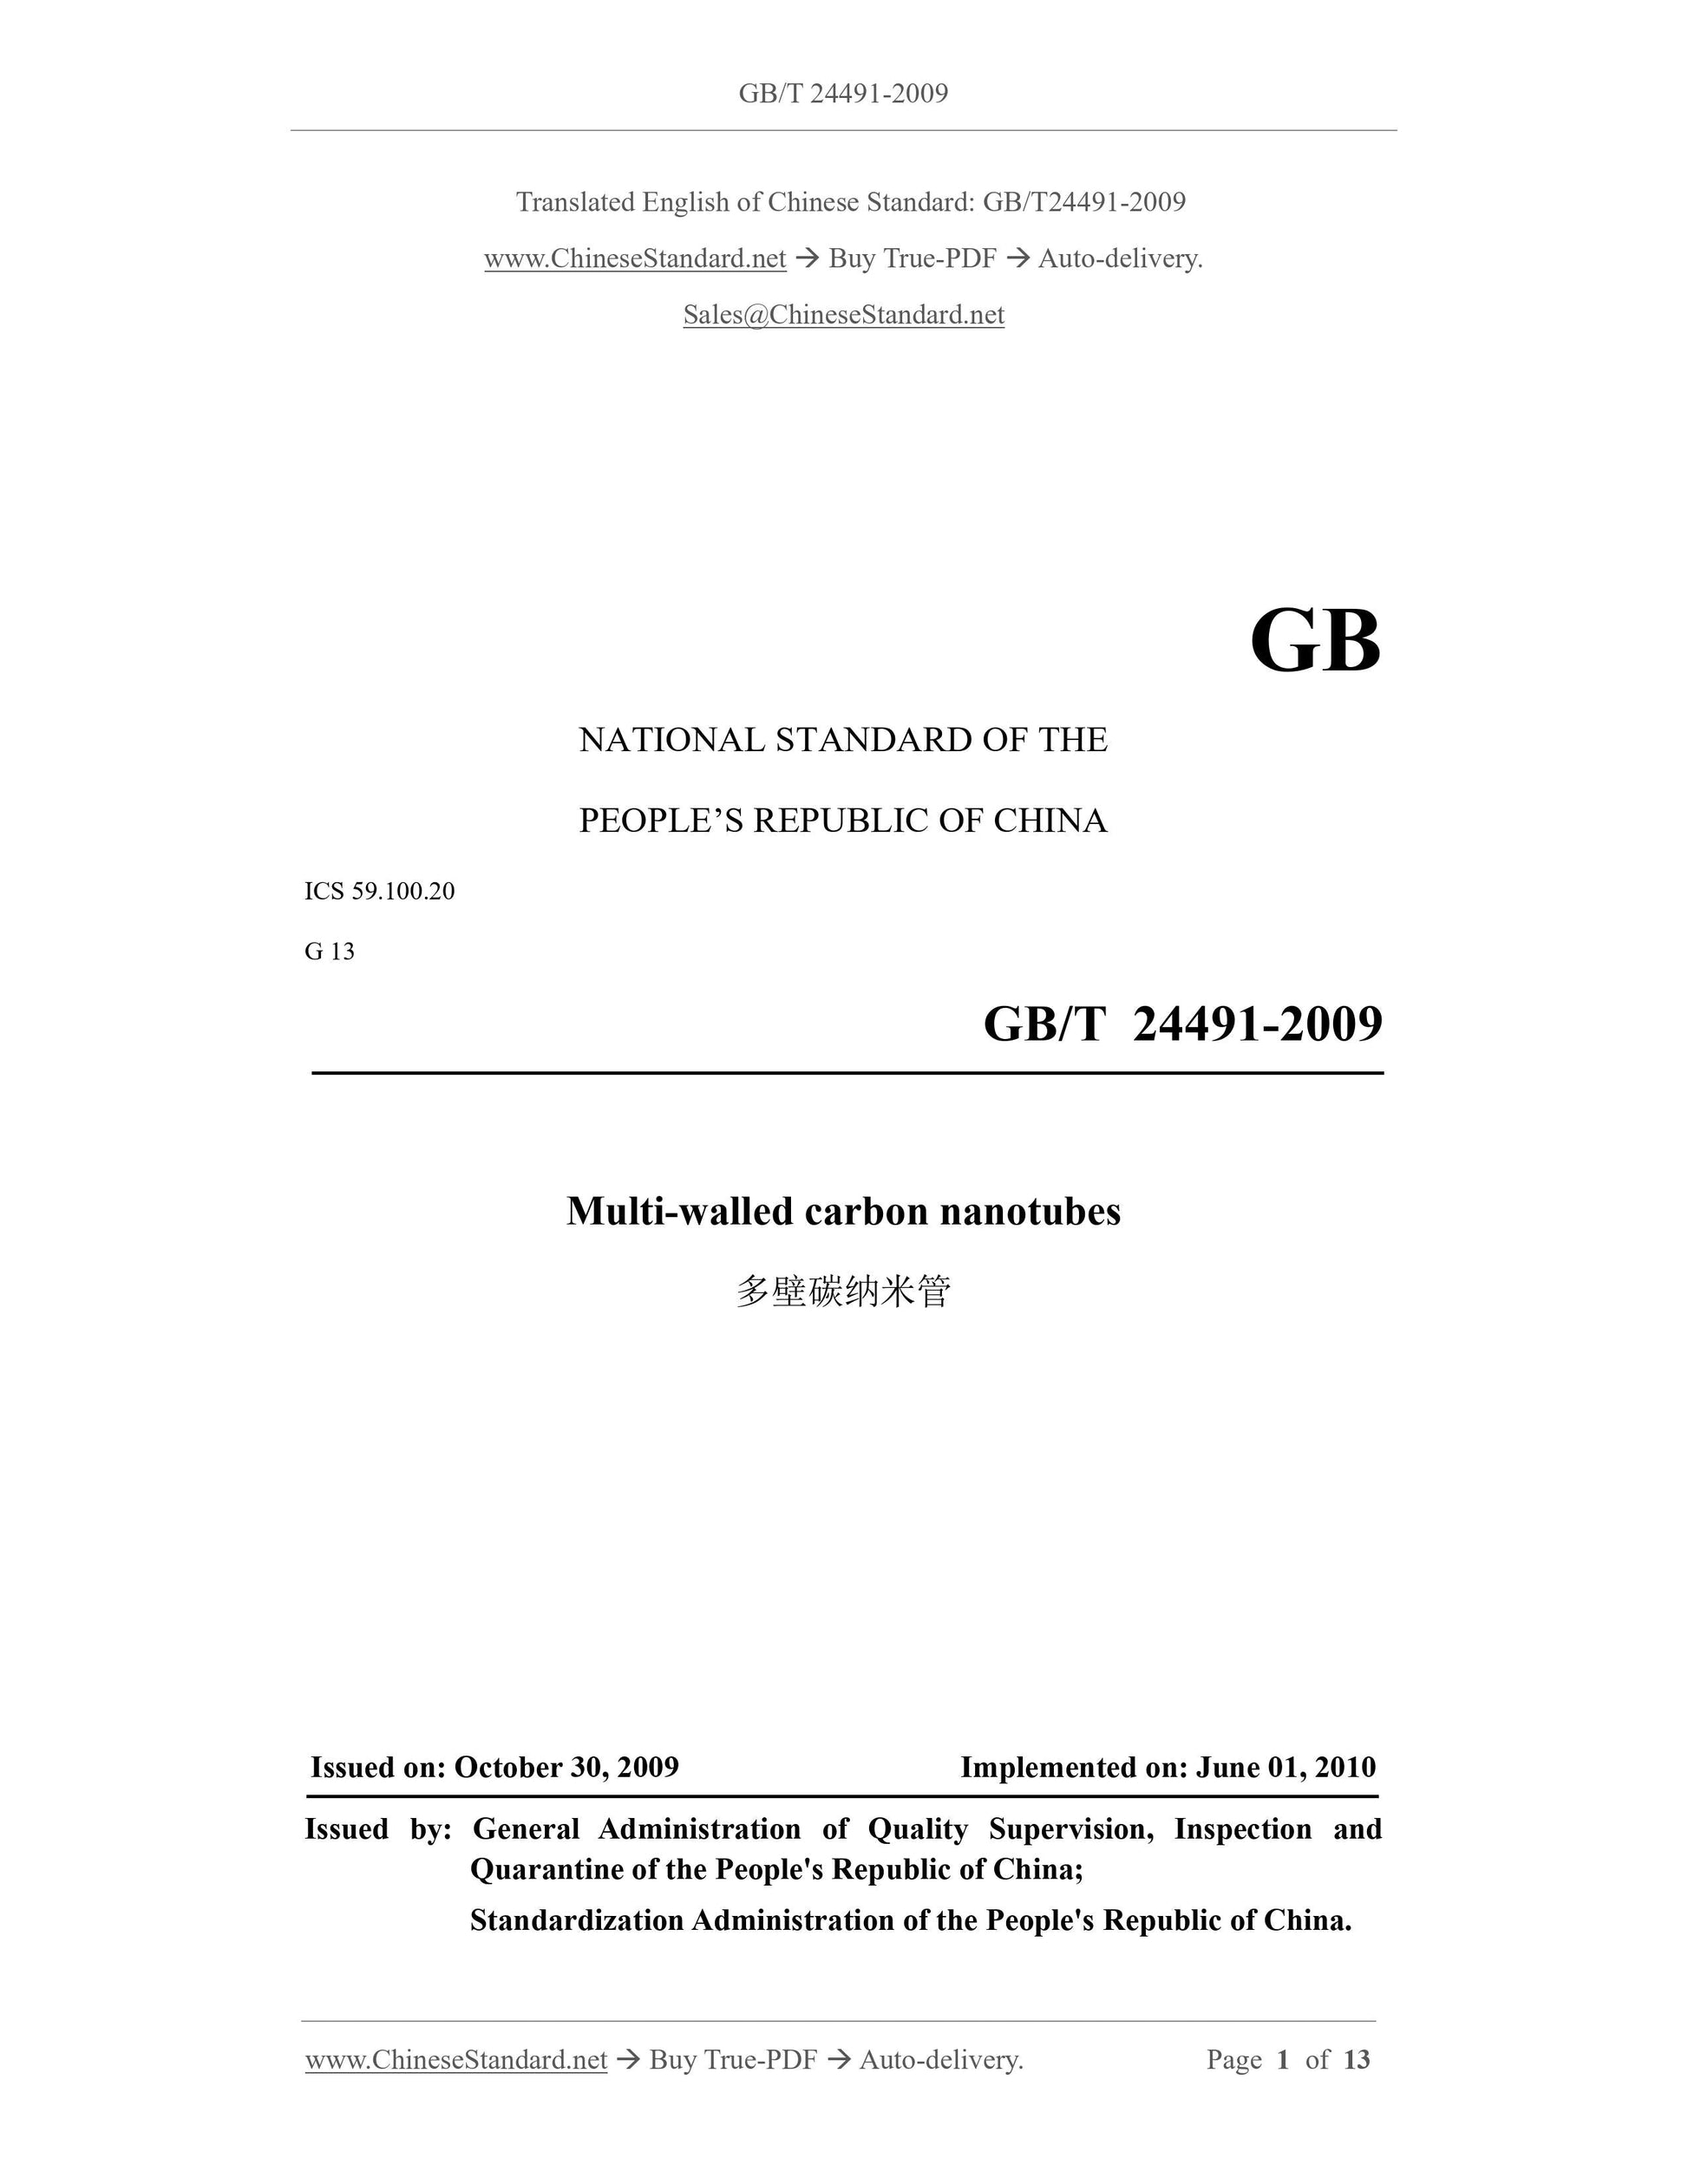 GB/T 24491-2009 Page 1